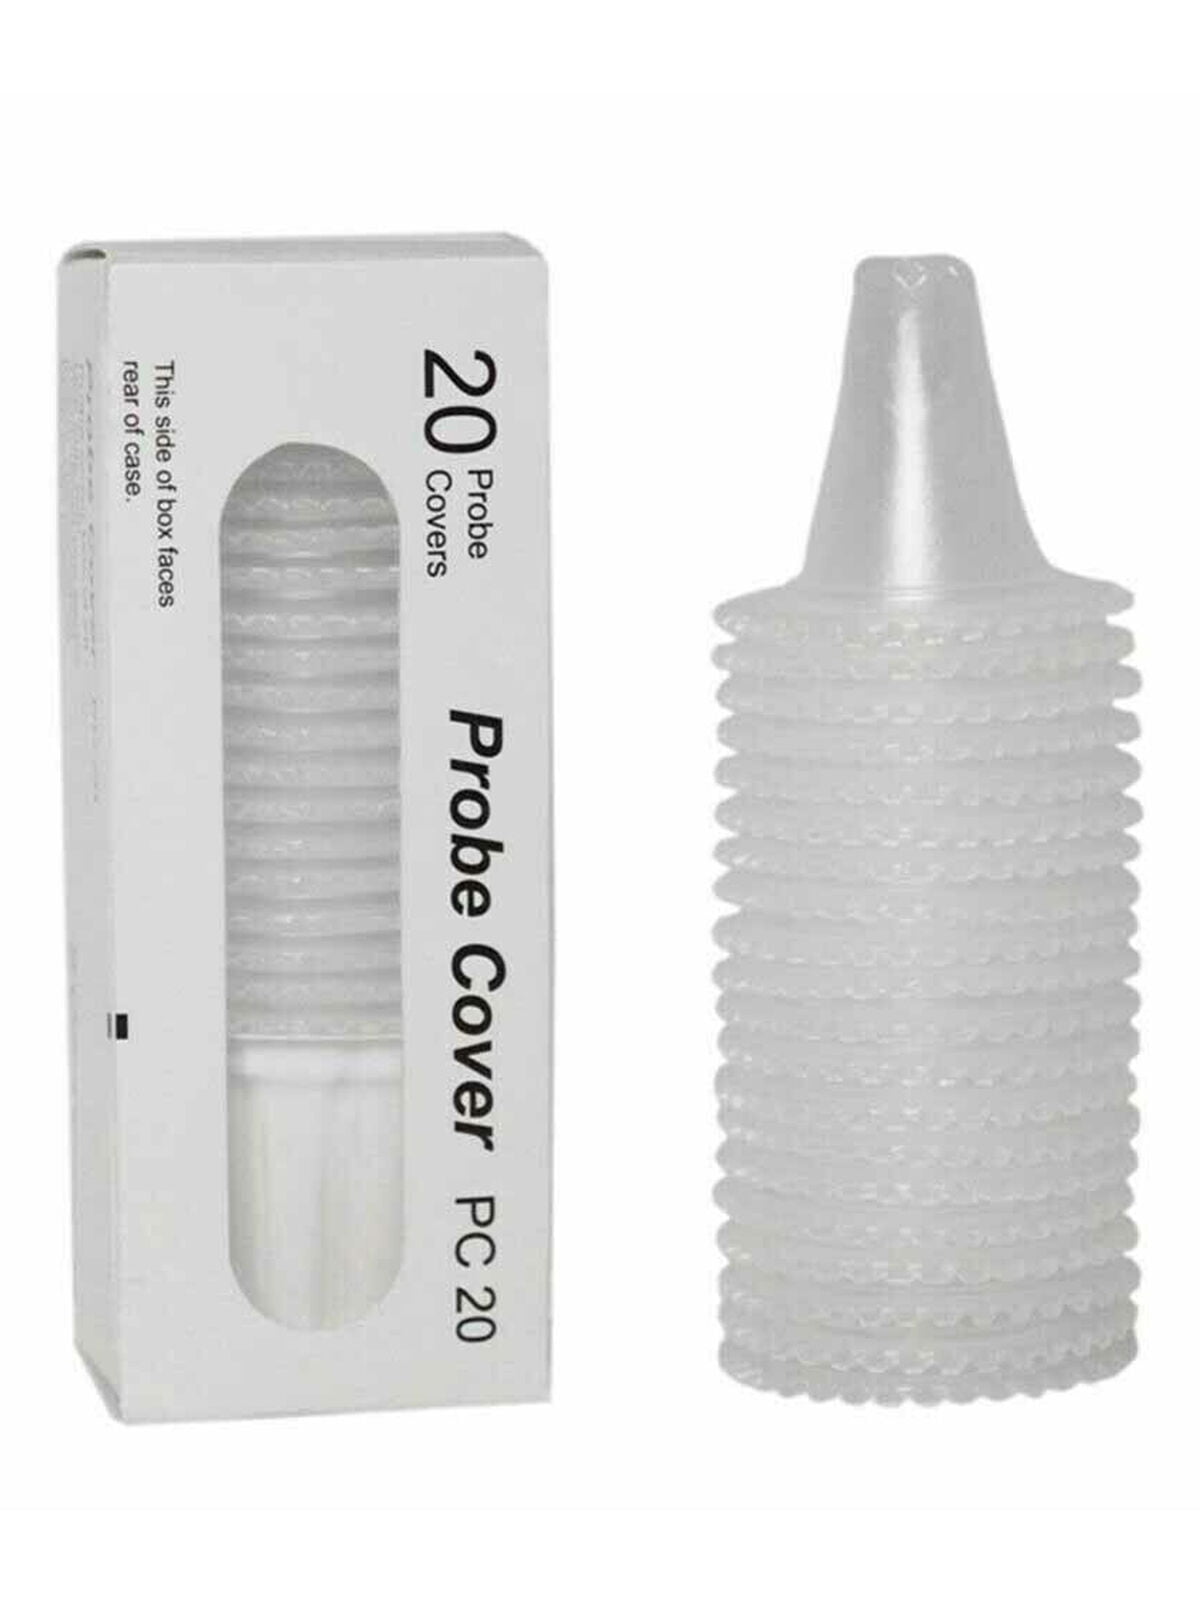 40 x Braun Replacement Lens Filters Probe Covers for ThermoScan Thermometer 6520 